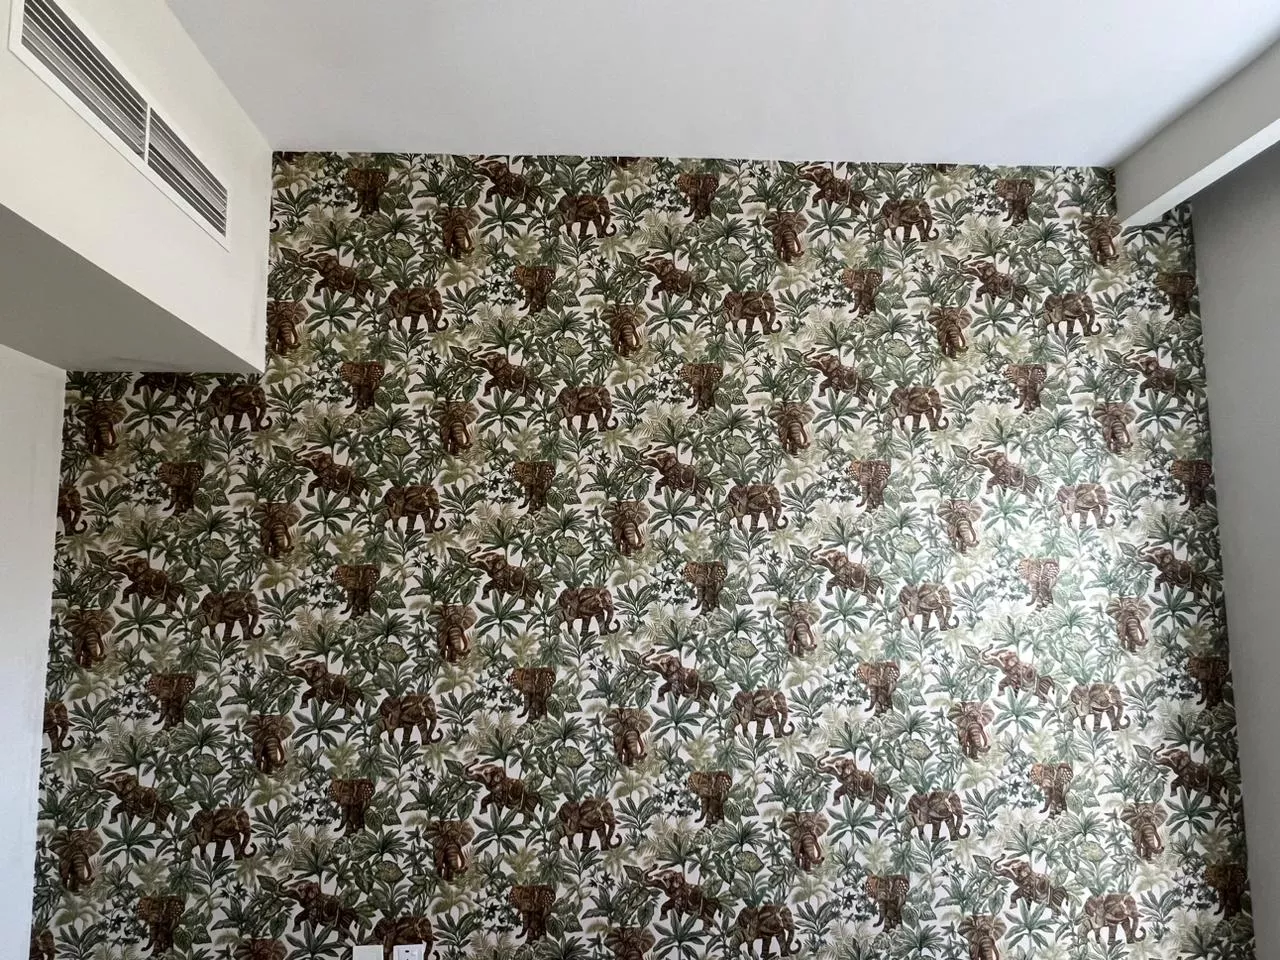 Wallpaper fixing in Abu Dhabi by Professional wallpaper fixers